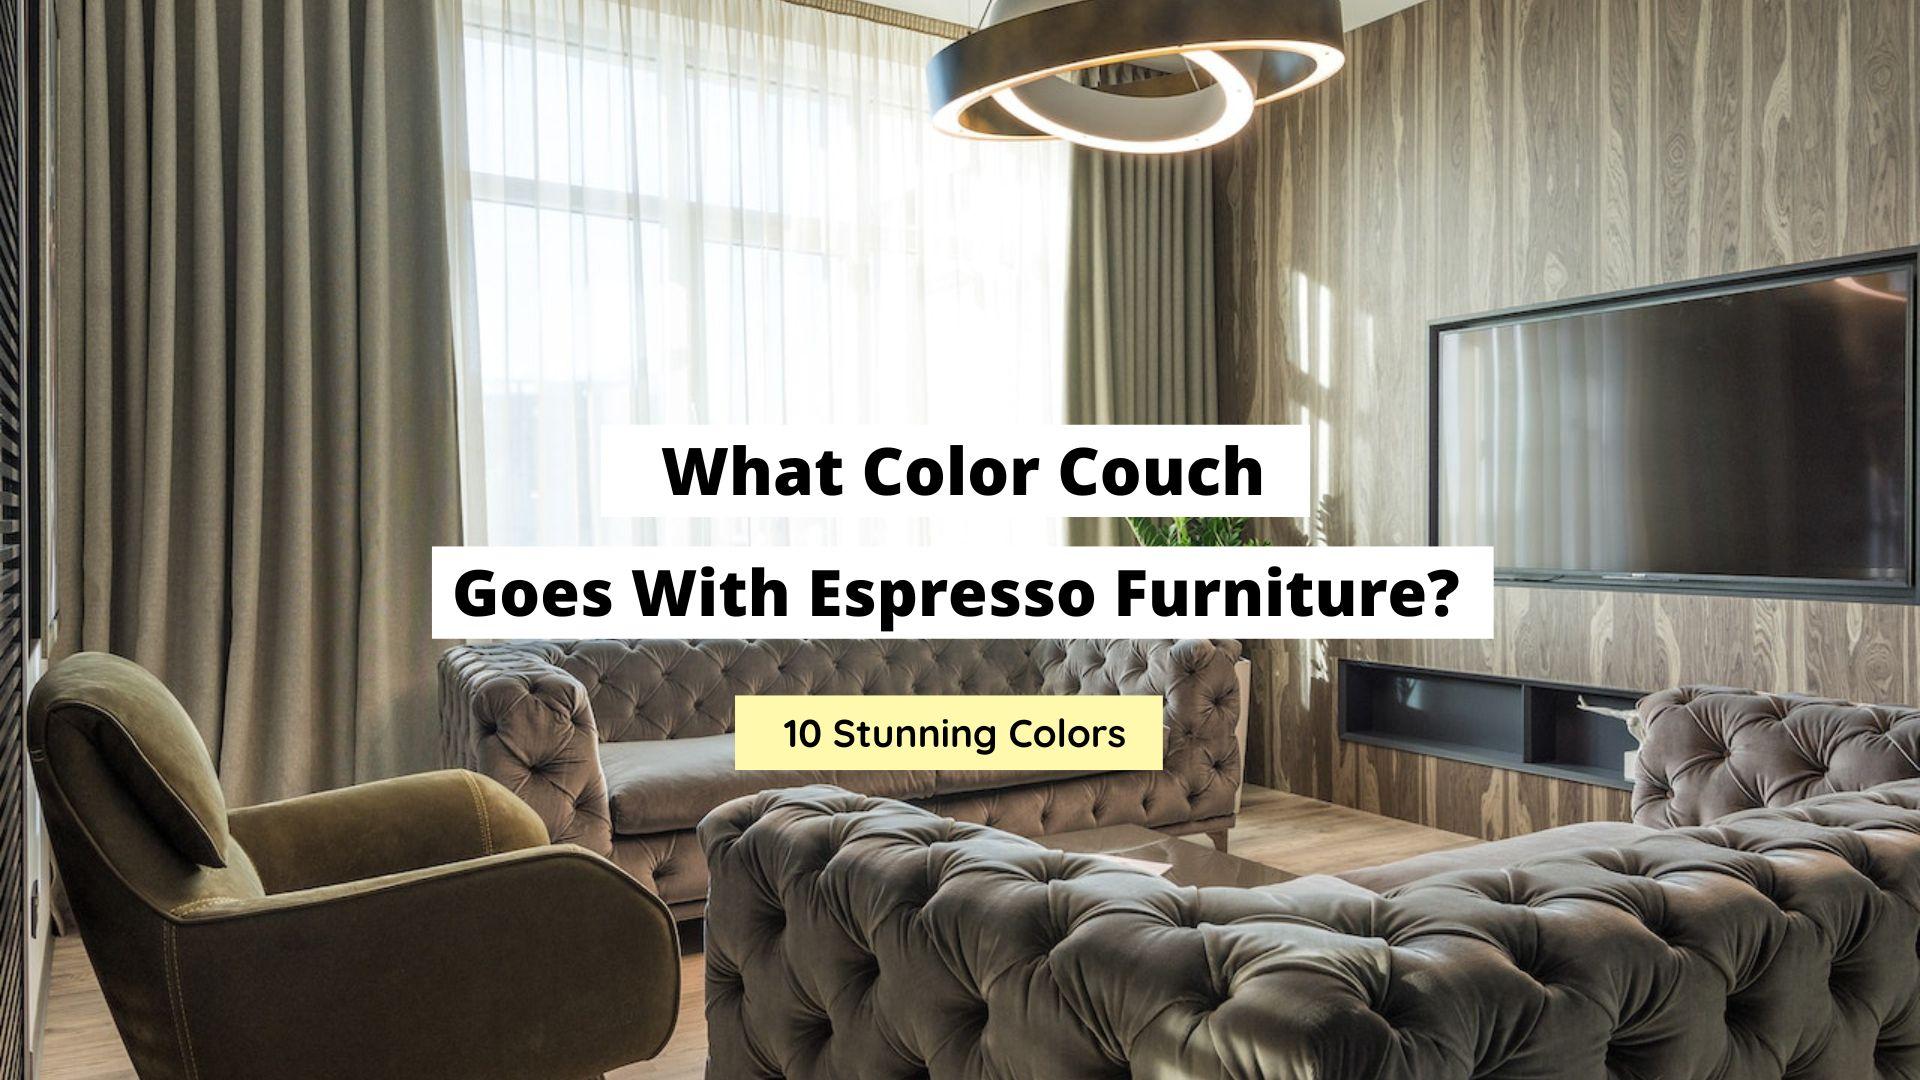 What Color Couch Goes With Espresso Furniture